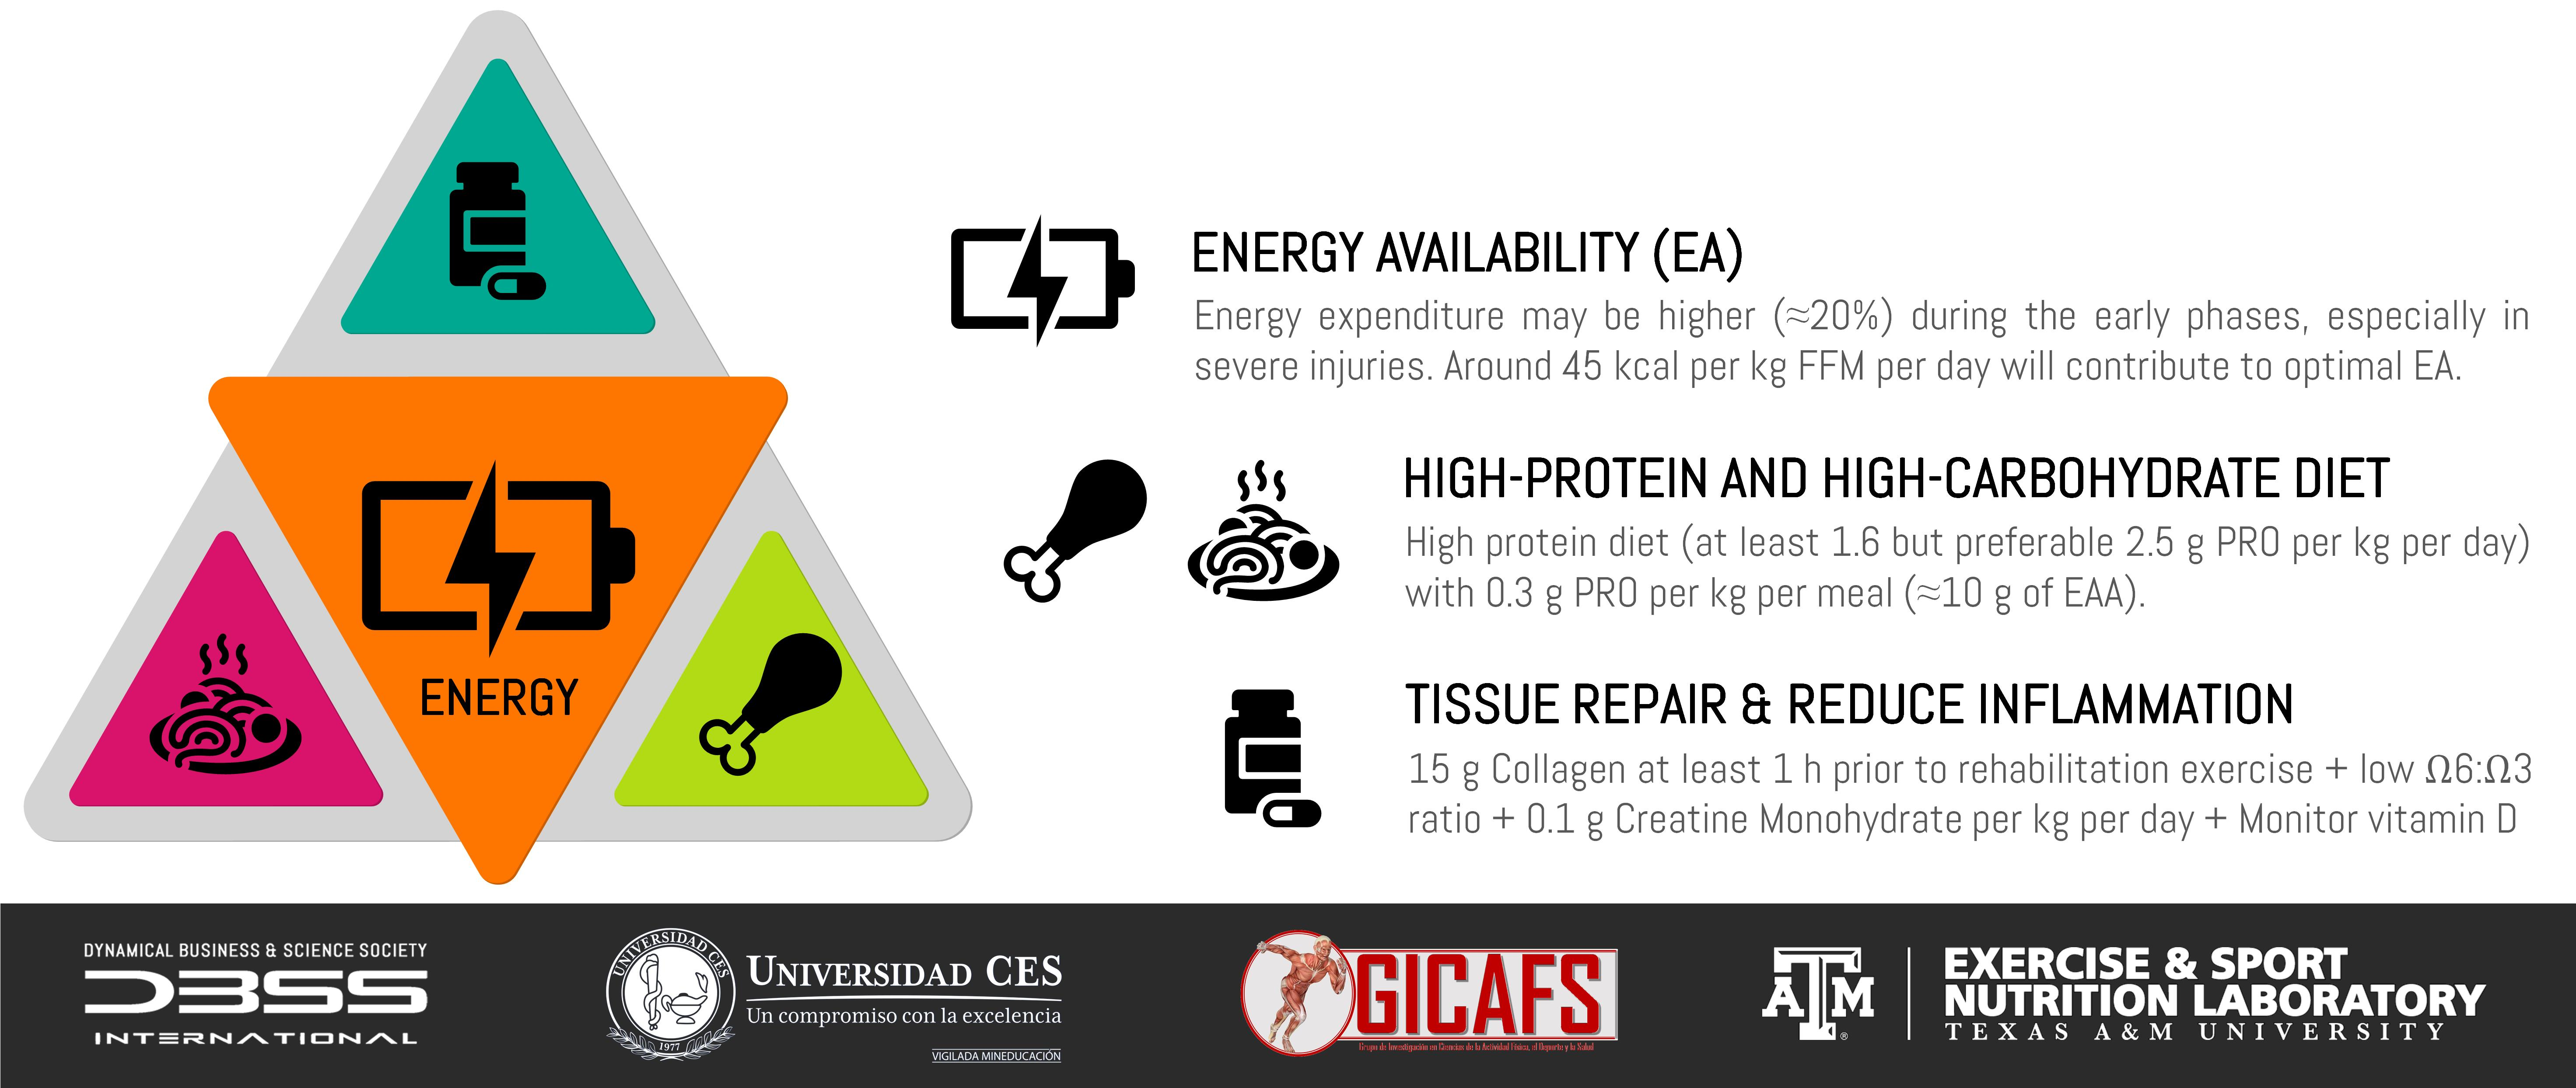 Muscle & Ligament Support - Boost Athletic Performance & Prevent Injury